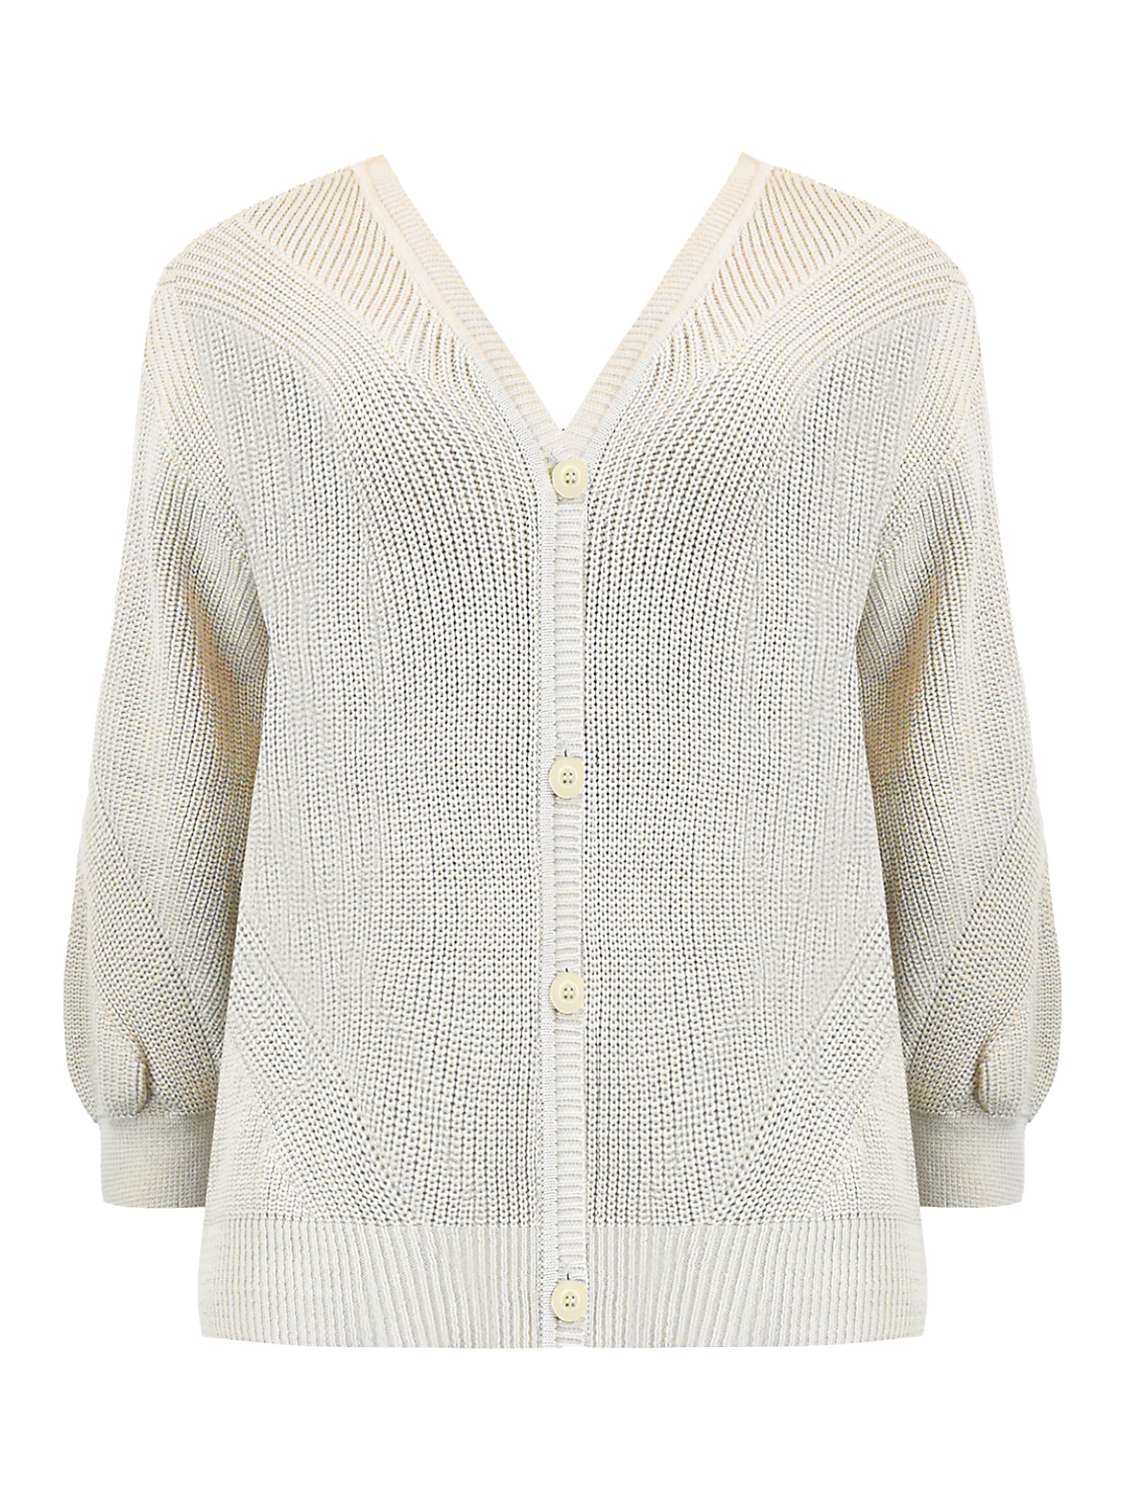 Buy Live Unlimited Curve Balloon Sleeve Knitted Cardigan, Grey Online at johnlewis.com